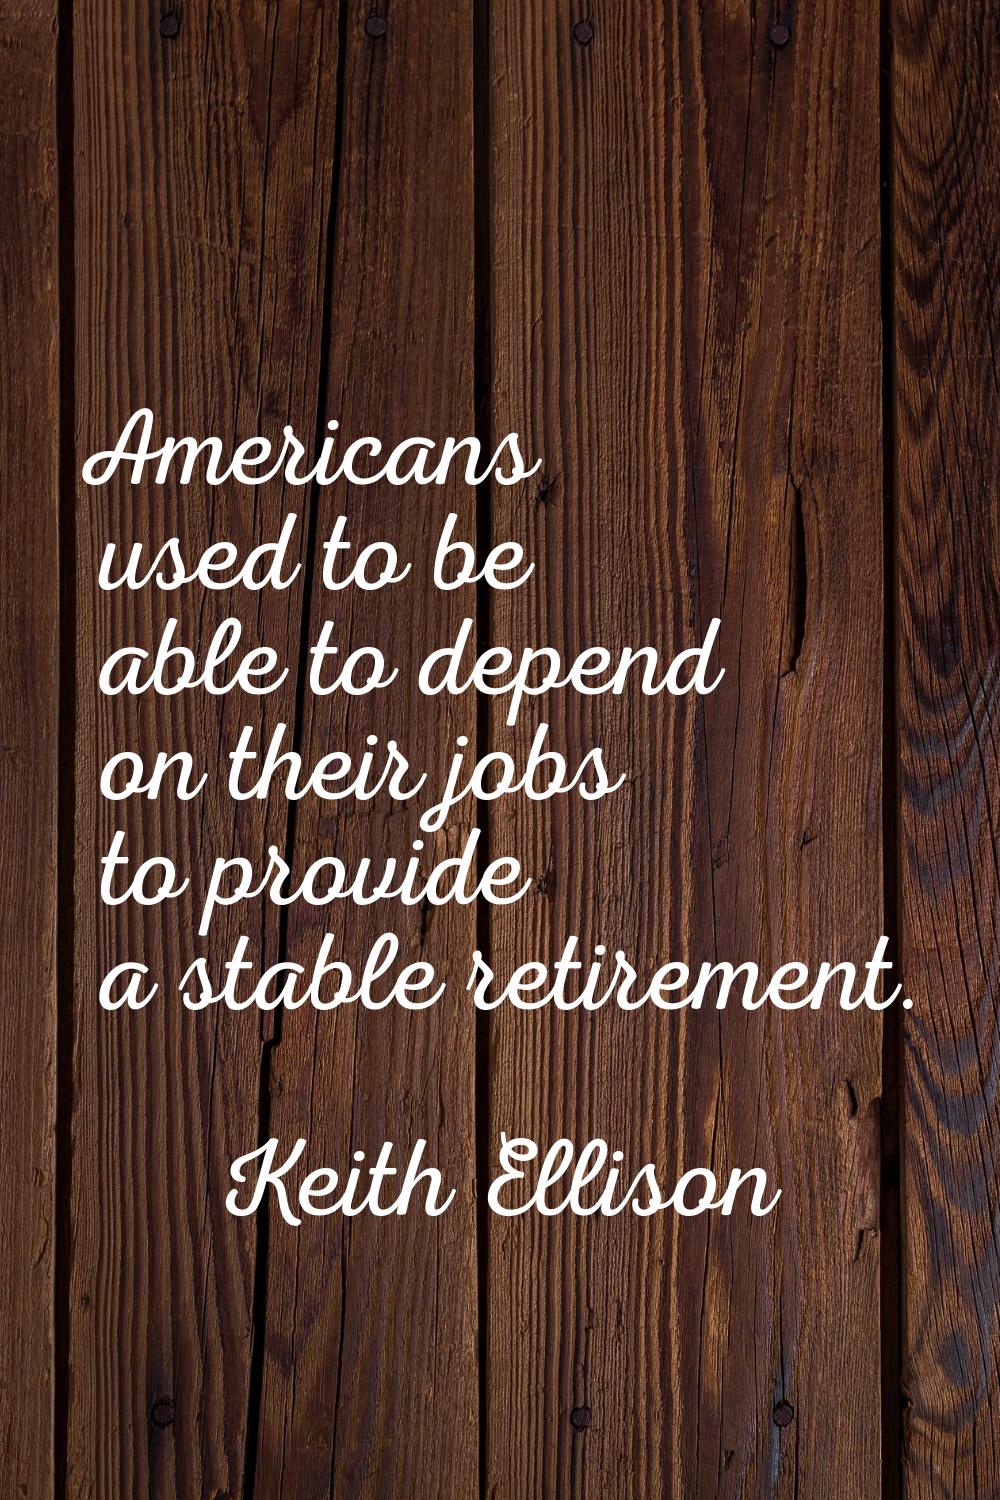 Americans used to be able to depend on their jobs to provide a stable retirement.